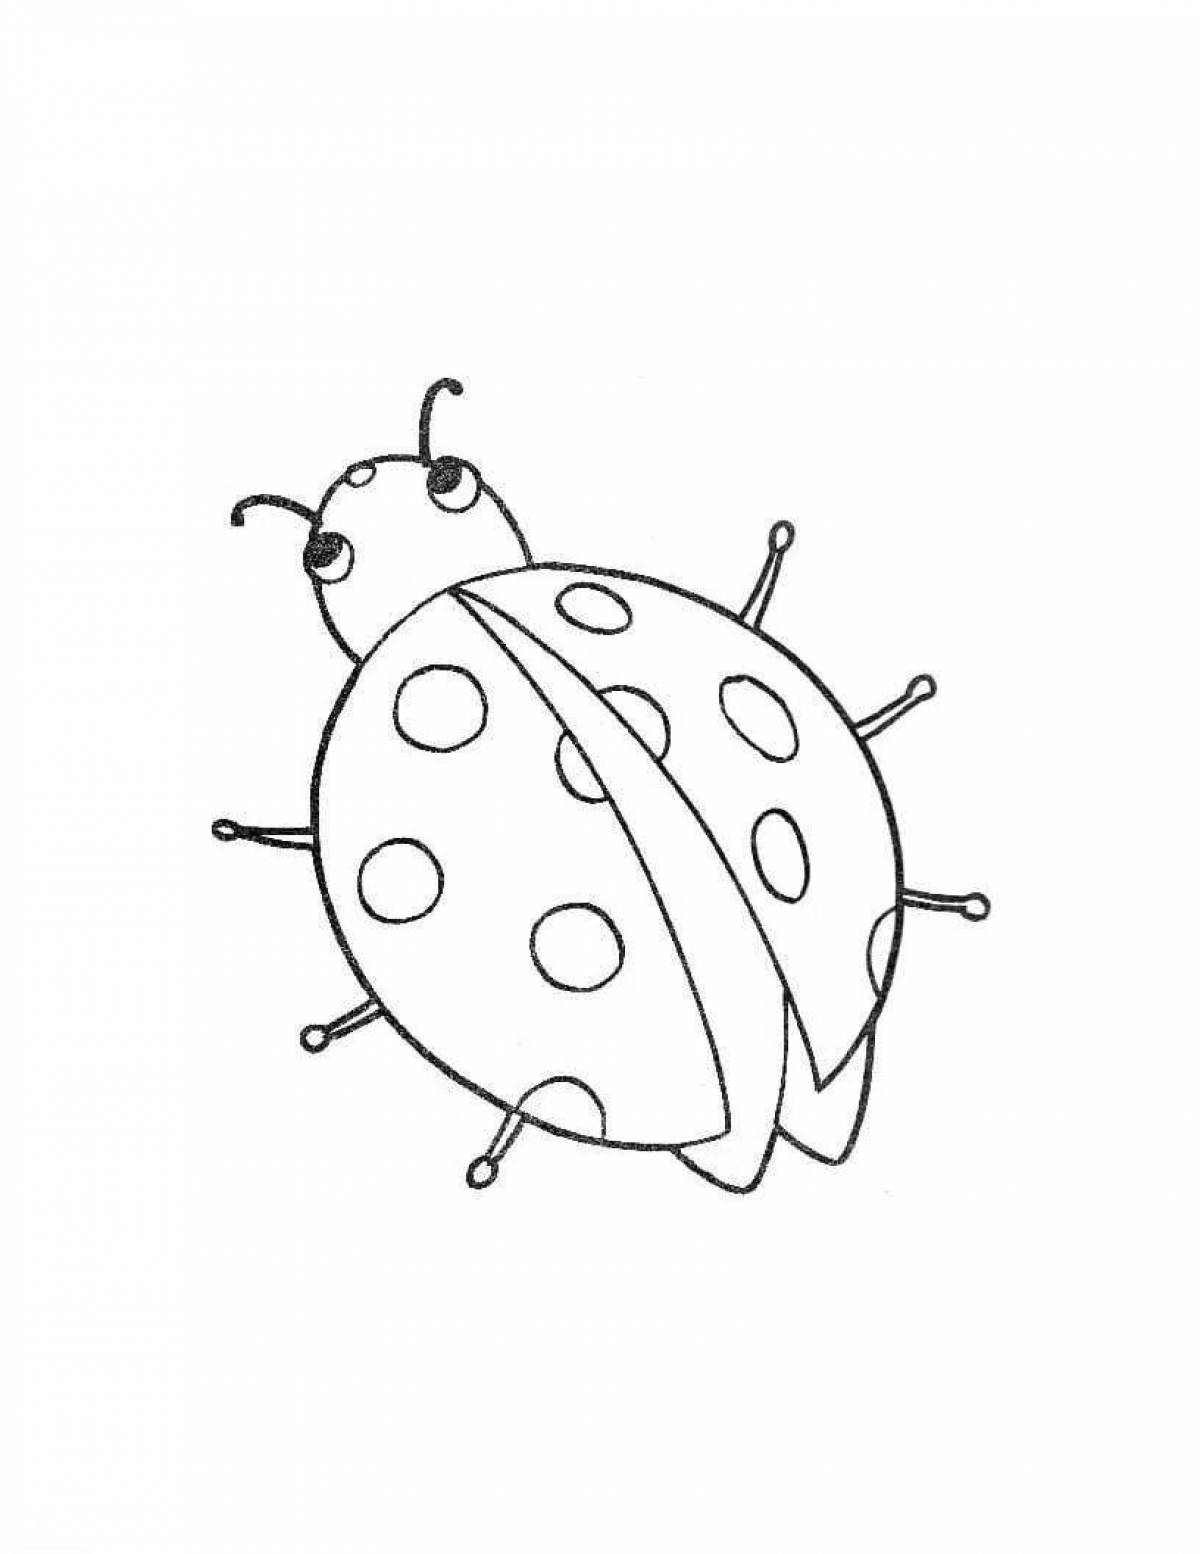 Amazing insect coloring pages